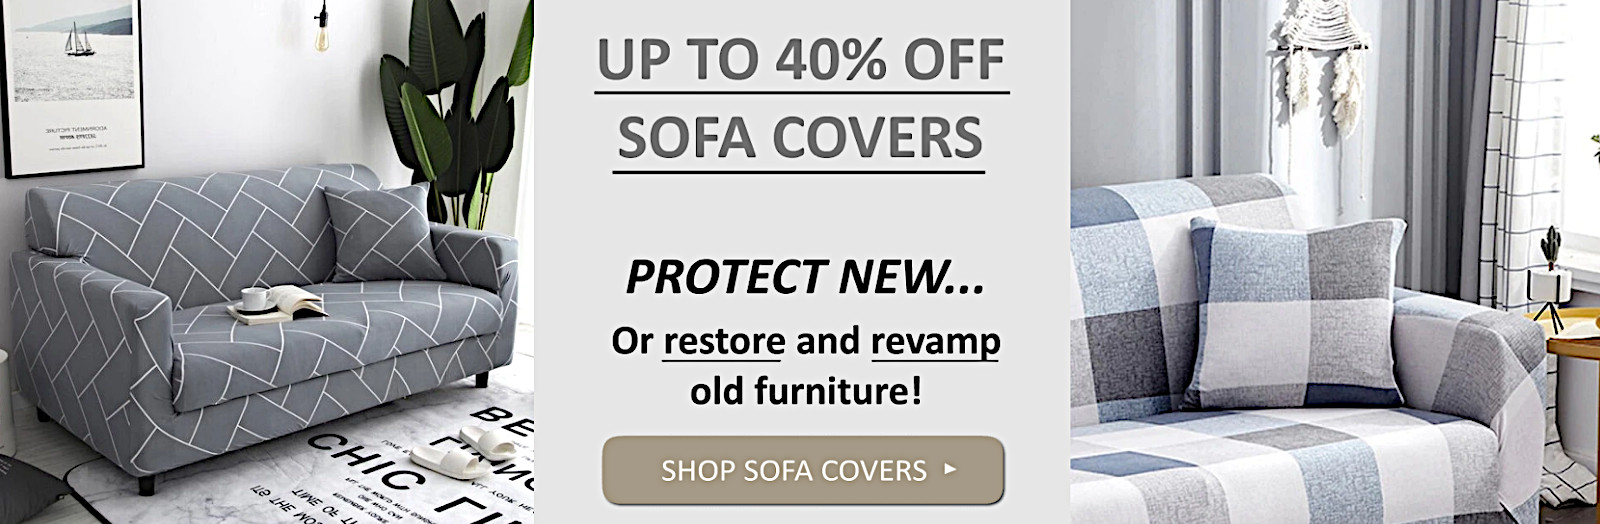 sofa covers on offer